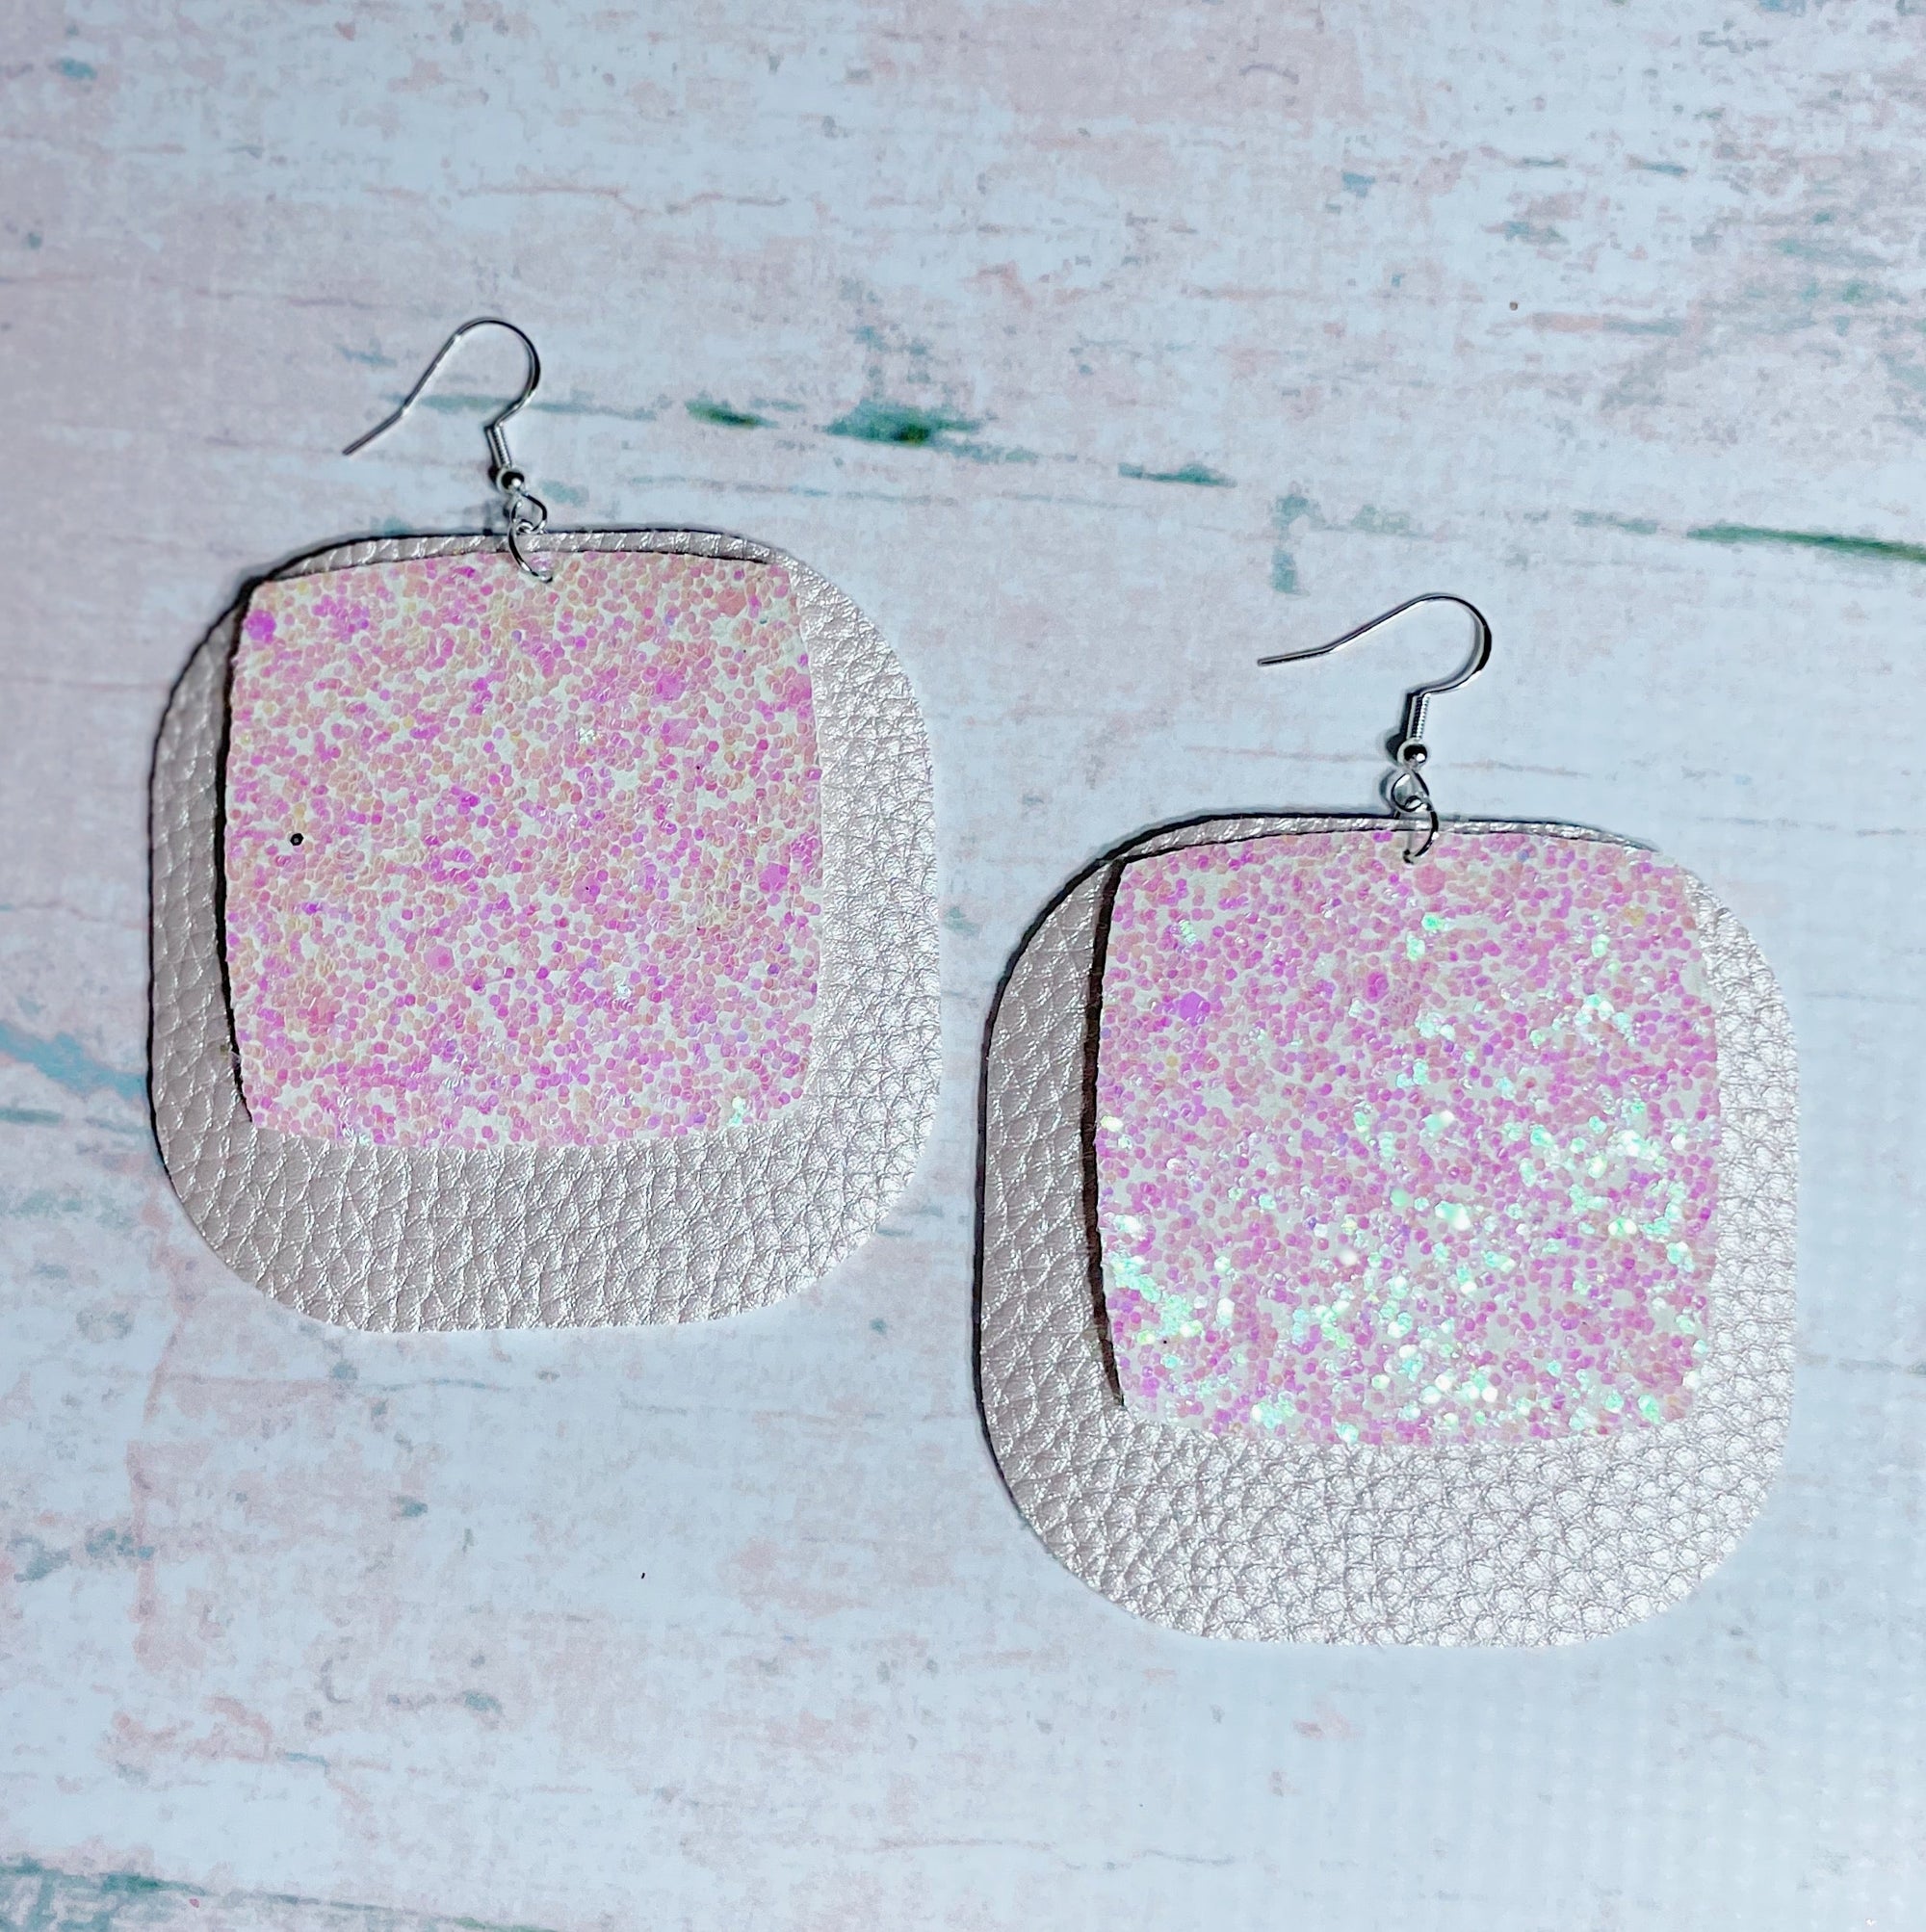 CookiBloom Earrings Iridescent Glitter & Pink Shimmer Leather Earrings